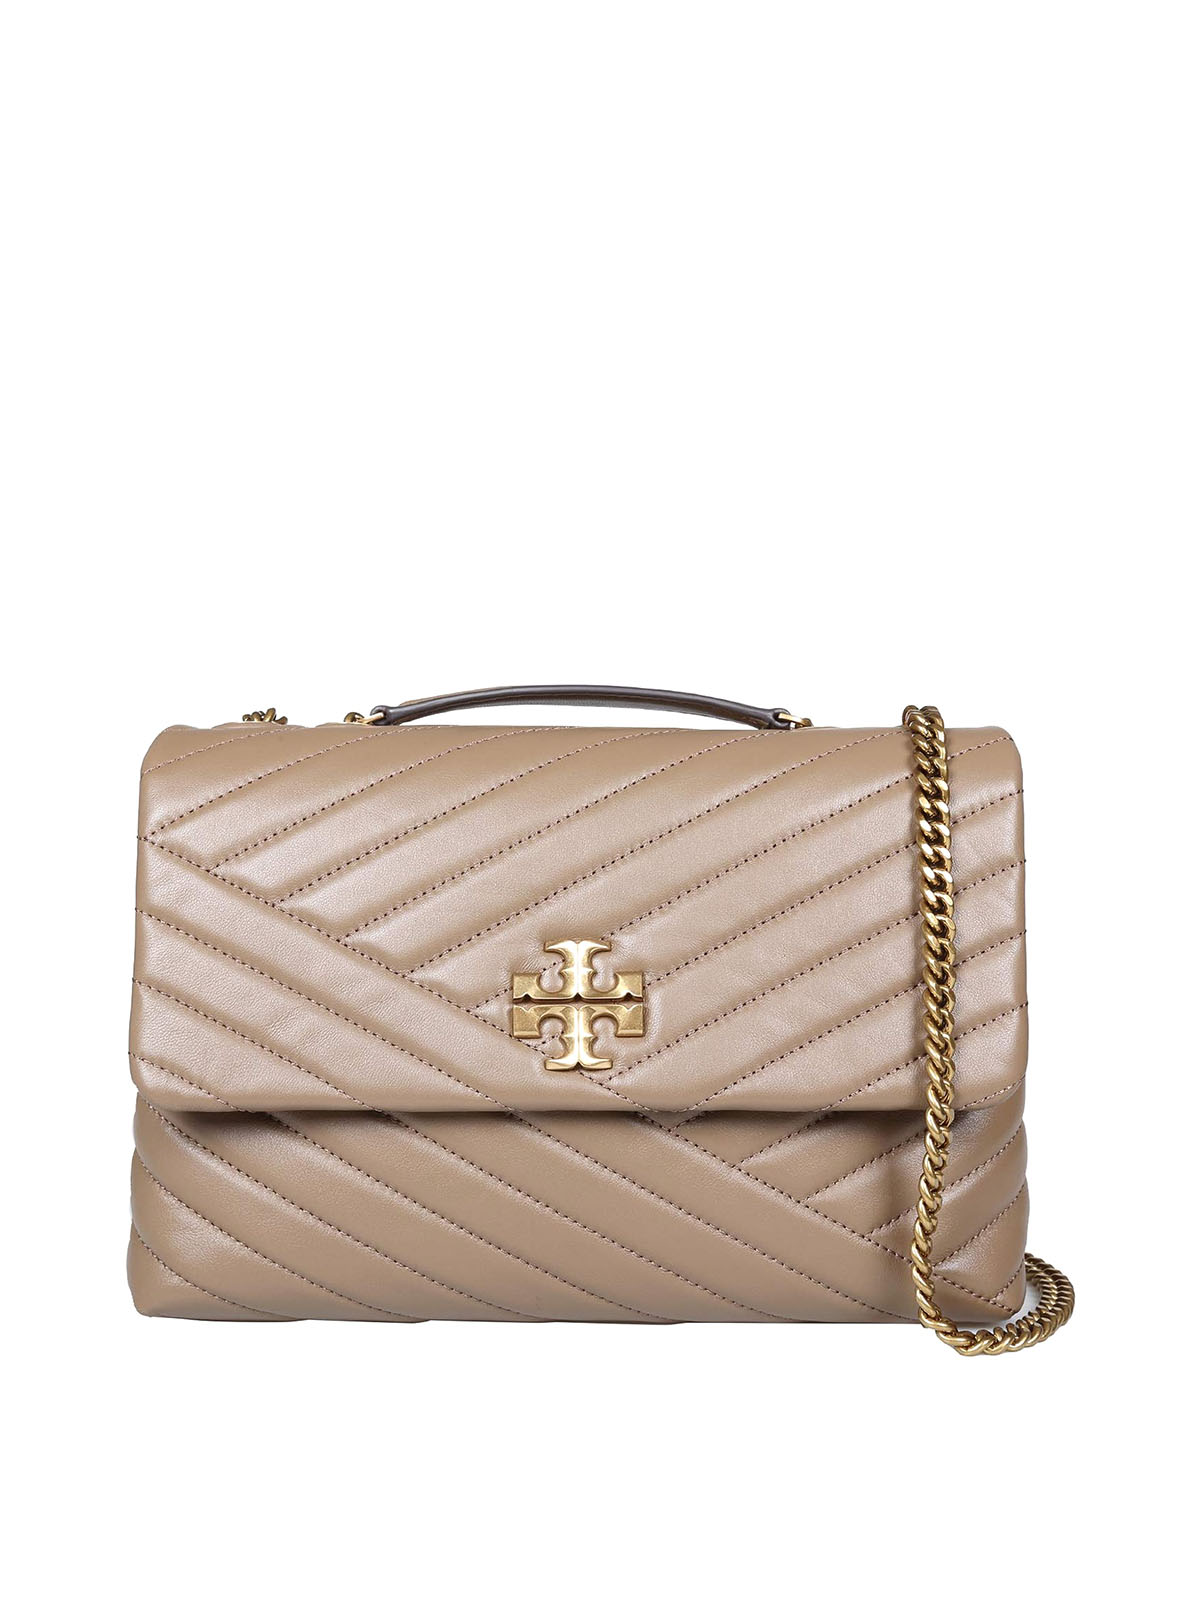 Cross body bags Tory Burch - Kira shoulder bag in sand color leather -  90446250